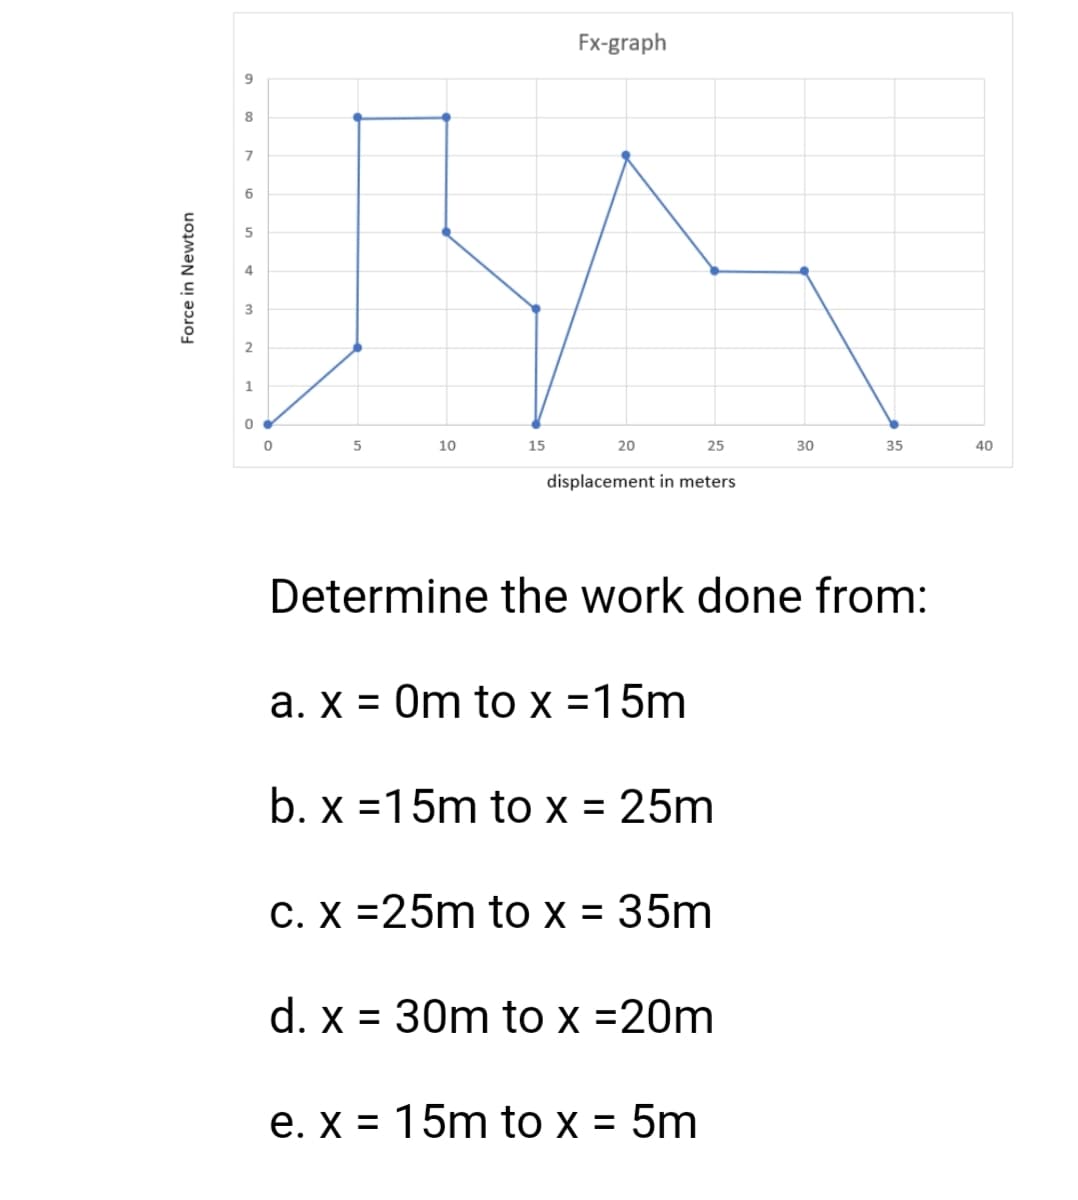 Fx-graph
9
8
6
4
3
1
10
15
20
25
30
35
40
displacement in meters
Determine the work done from:
a. X = 0m tO x =15m
b. x =15m to x = 25m
C. X =25m to x = 35m
d. x = 30m to x =20m
%3D
e. x = 15m to x = 5m
Force in Newton
